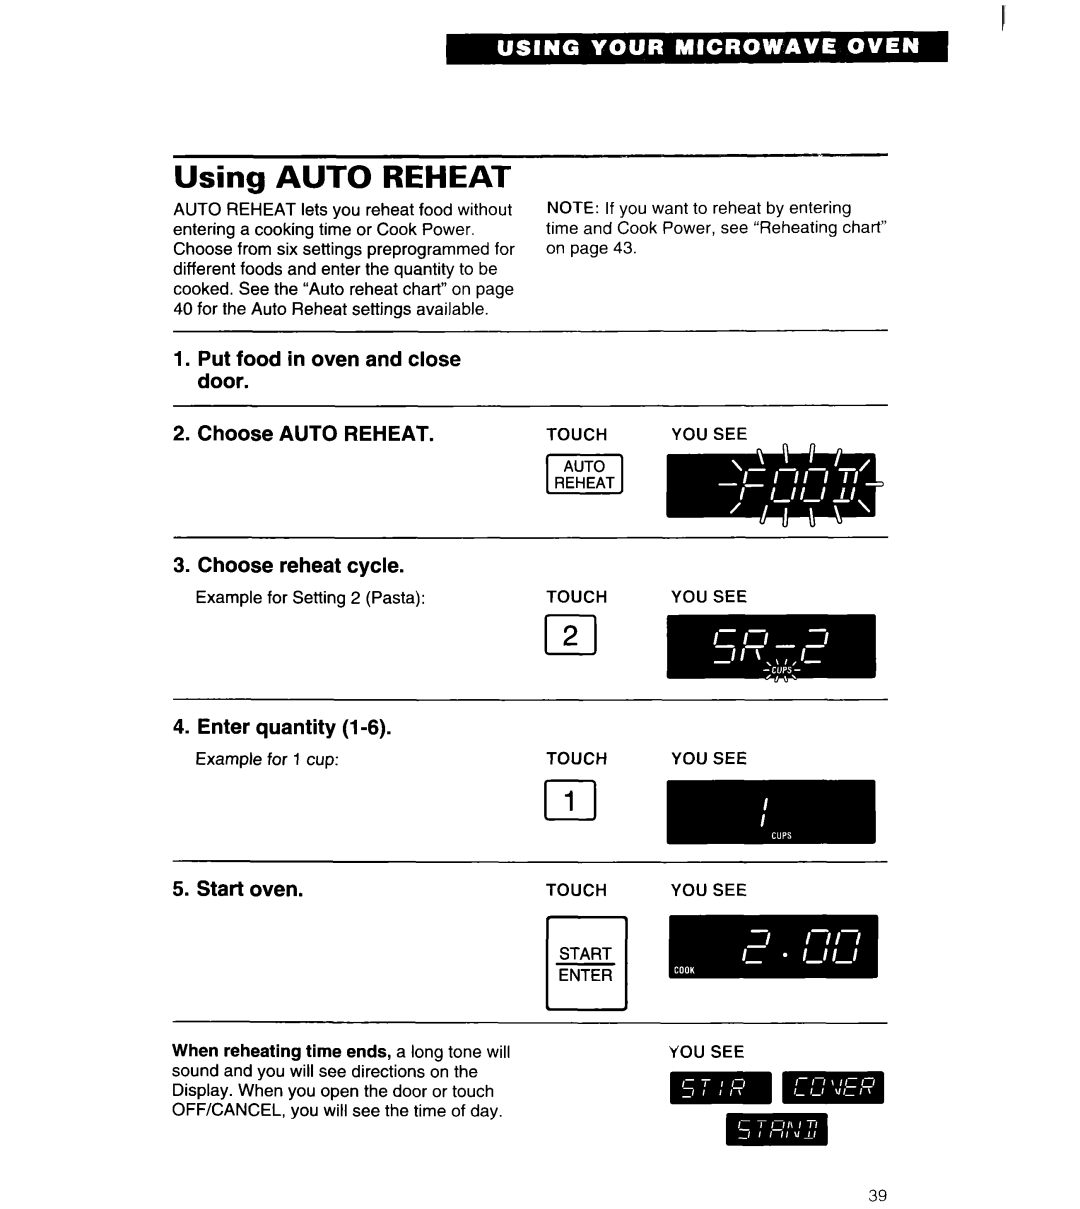 Whirlpool MT6120XBB, MT6120XBQ Using AUTO REHEAT, Put food in oven and close door, Choose AUTO REHEAT, Choose reheat cycle 